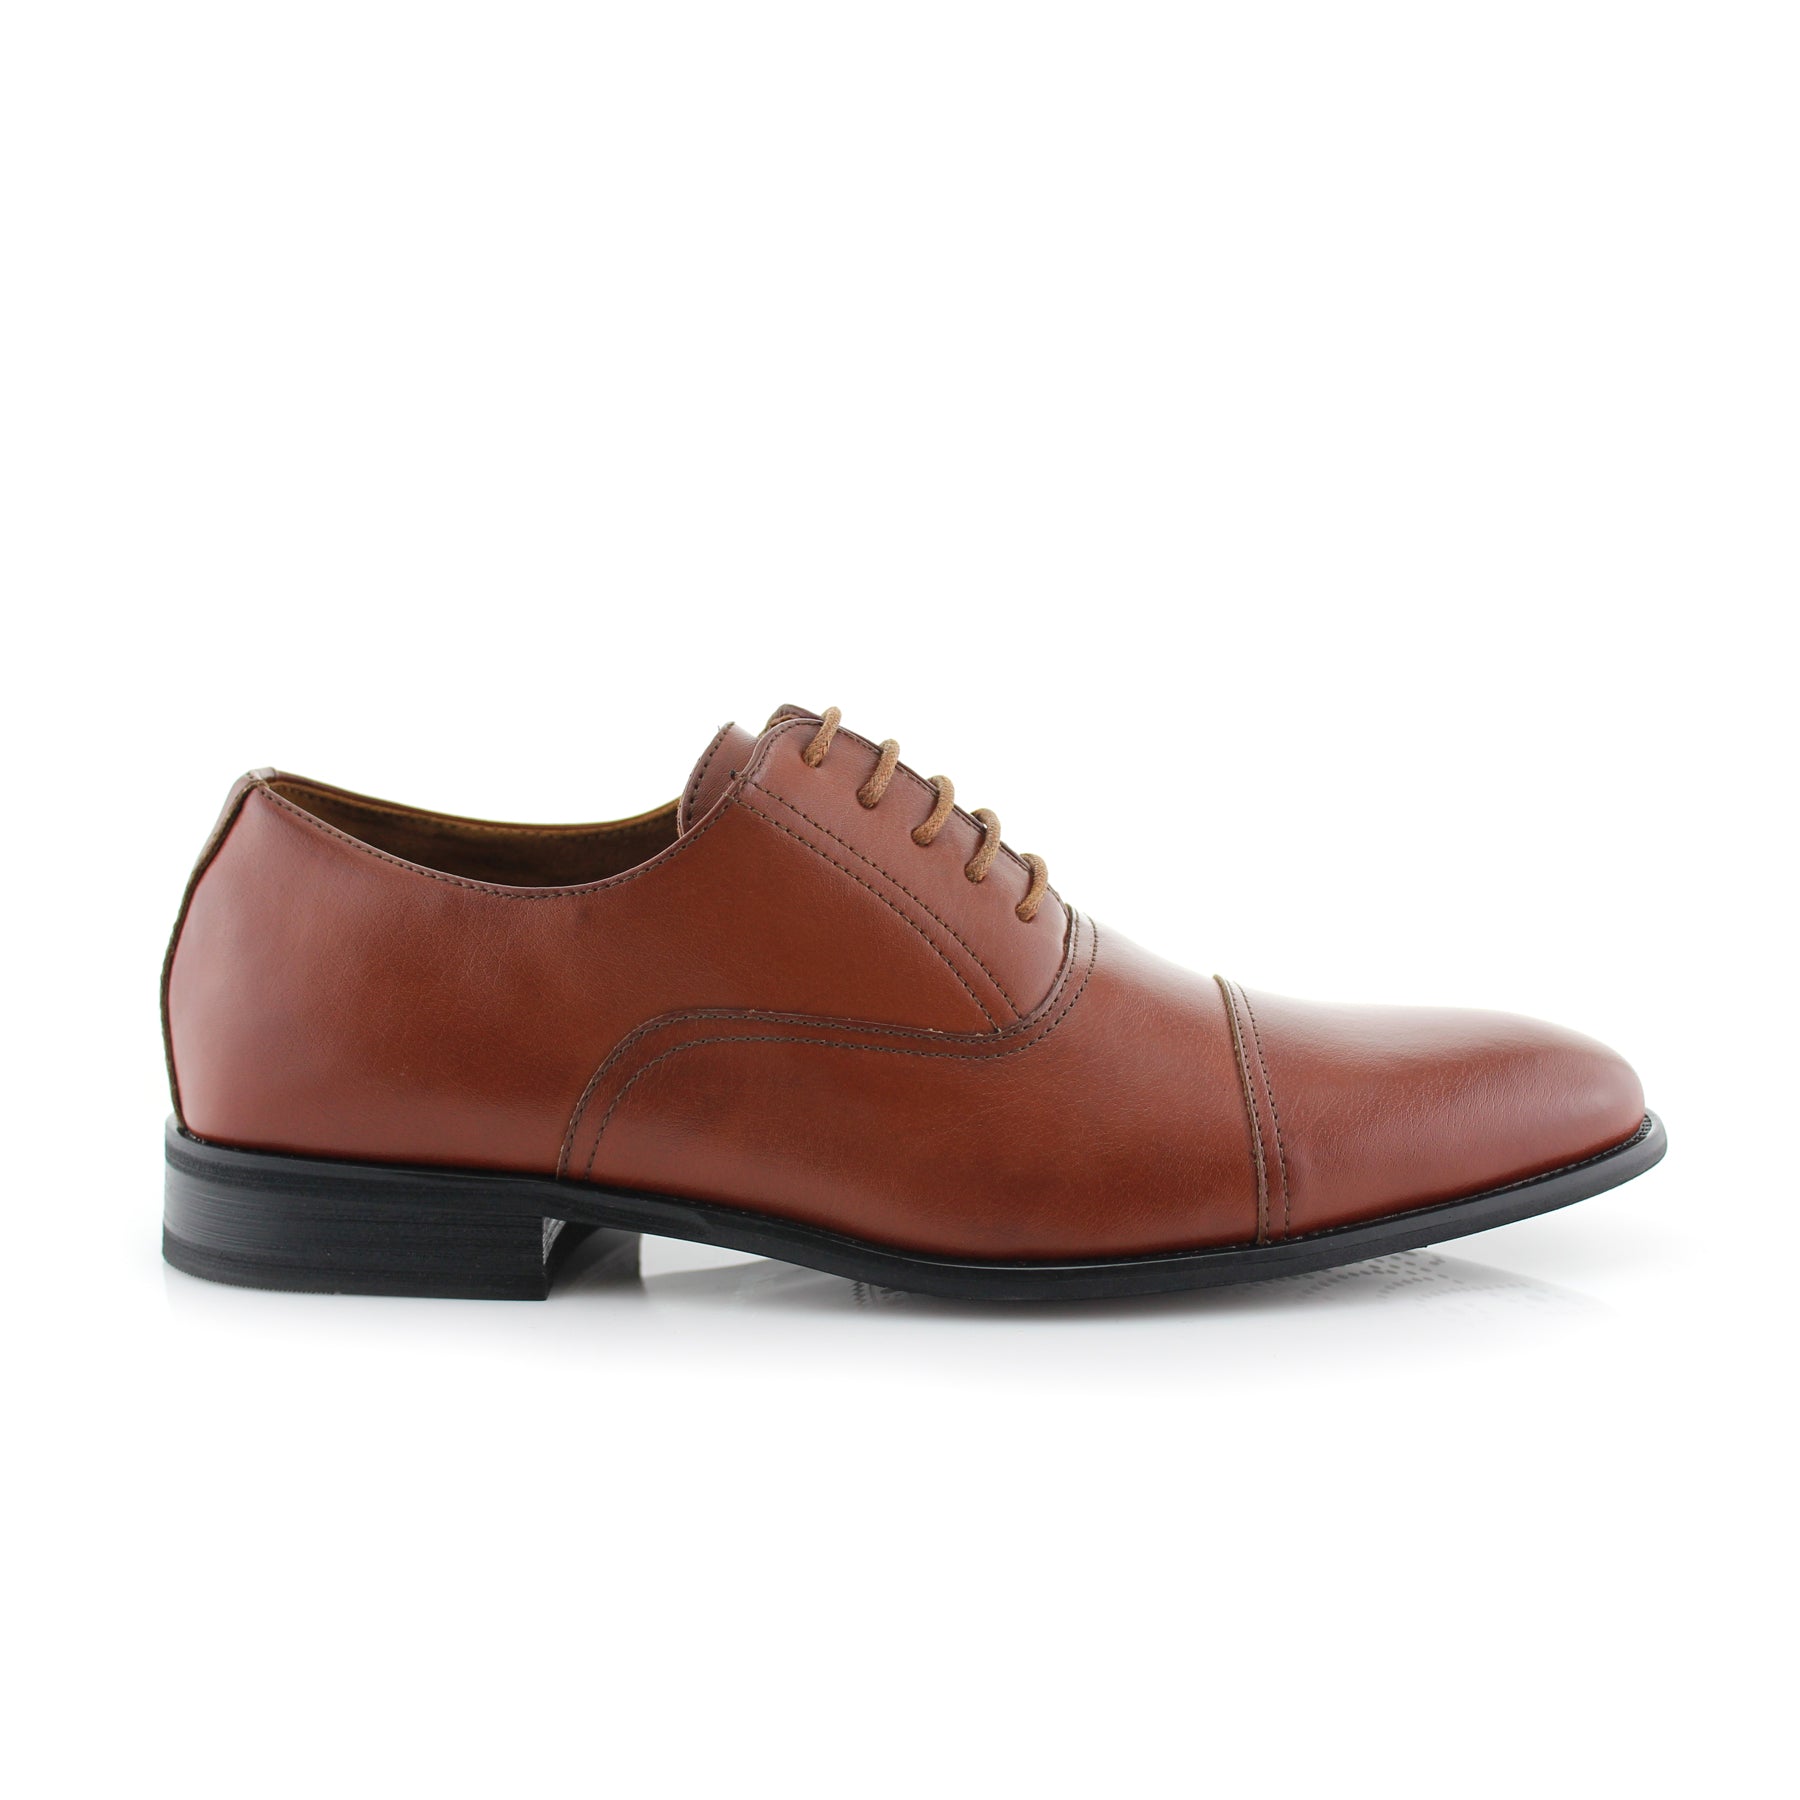 Classic Cap-Toe Oxford Dress Shoes | Charles by Ferro Aldo | Conal Footwear | Outer Side Angle View